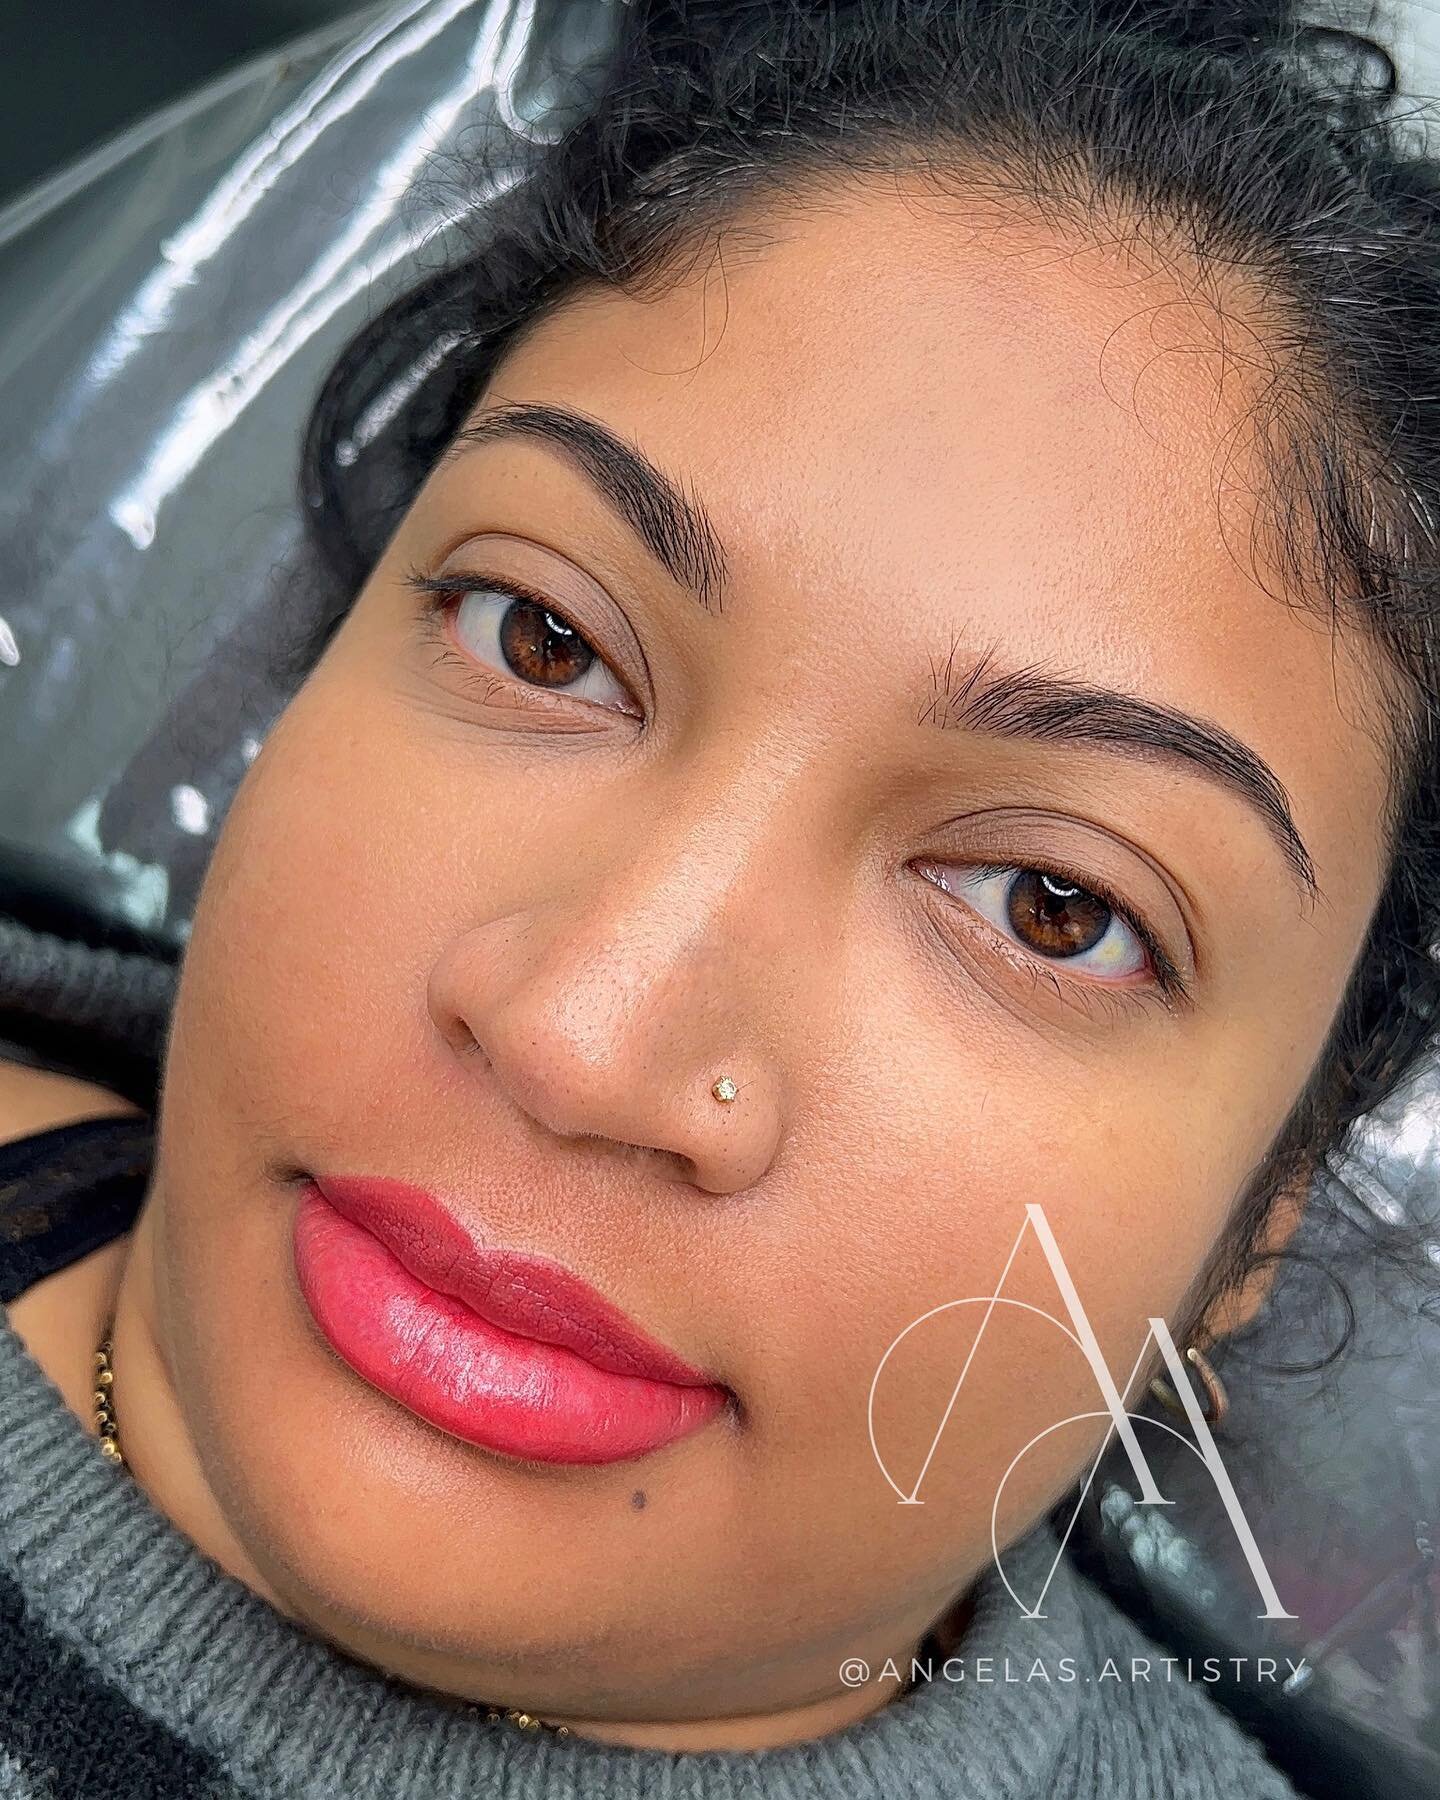 ➡️ Swipe to see her lips before &amp; after
Lip blush on pigmented lips 
Our goal is to even out lip tone and brighten up the colour.

__________________________________________

𝘼𝙥𝙥𝙤𝙞𝙣𝙩𝙢𝙚𝙣𝙩 𝙩𝙞𝙢𝙚: 2.5 - 3 hours

𝙃𝙚𝙖𝙡𝙞𝙣𝙜 𝙩𝙞𝙢𝙚